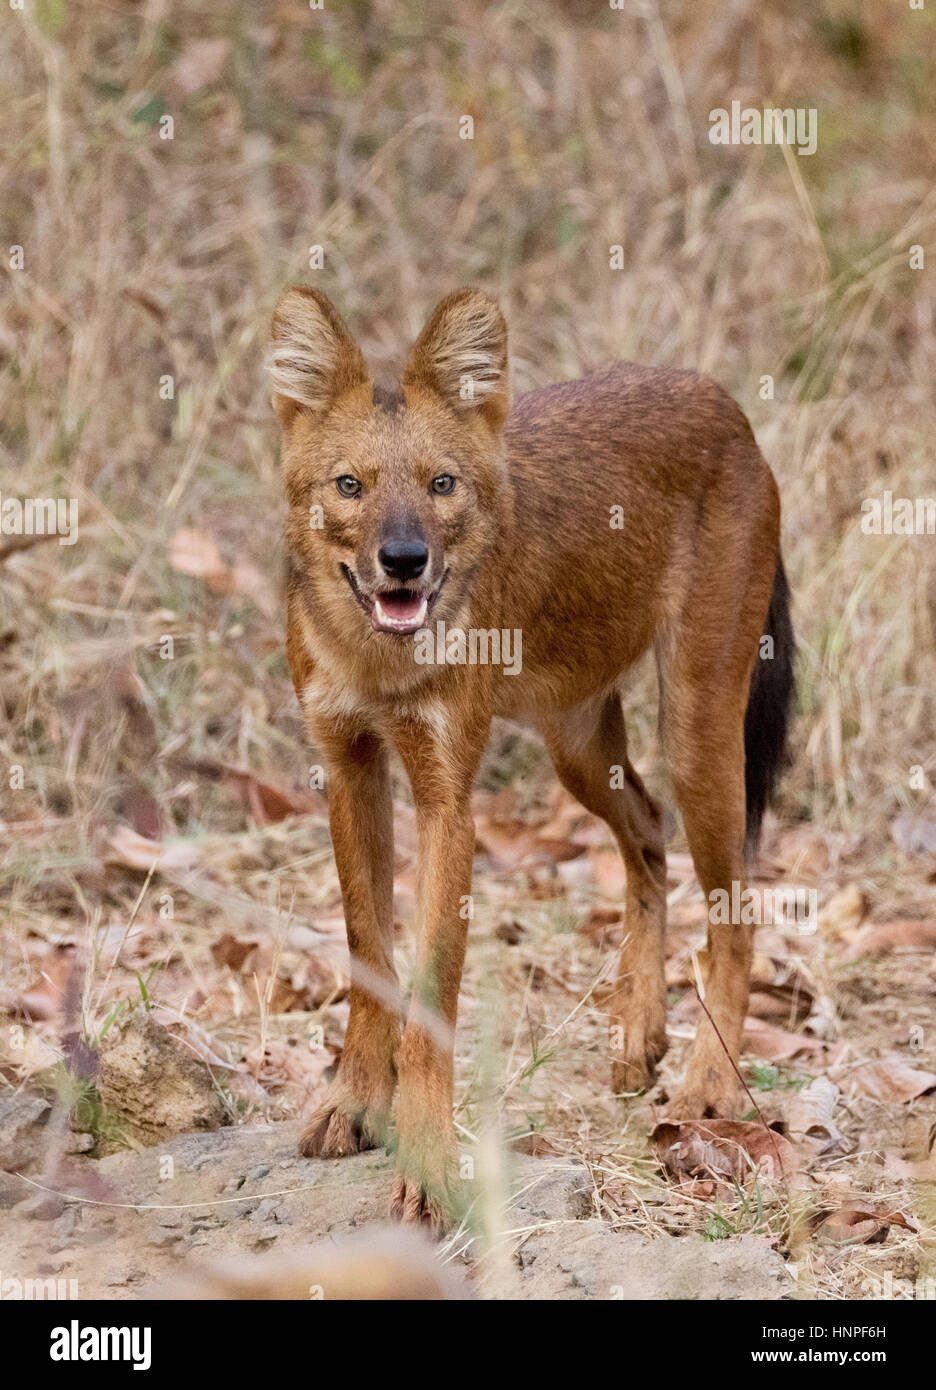 Adult Indian Wild Dog or Dhole, ( Cuon alpinus ), also known as the Asiatic Wild Dog, Tadoba National Park, India Stock Photo